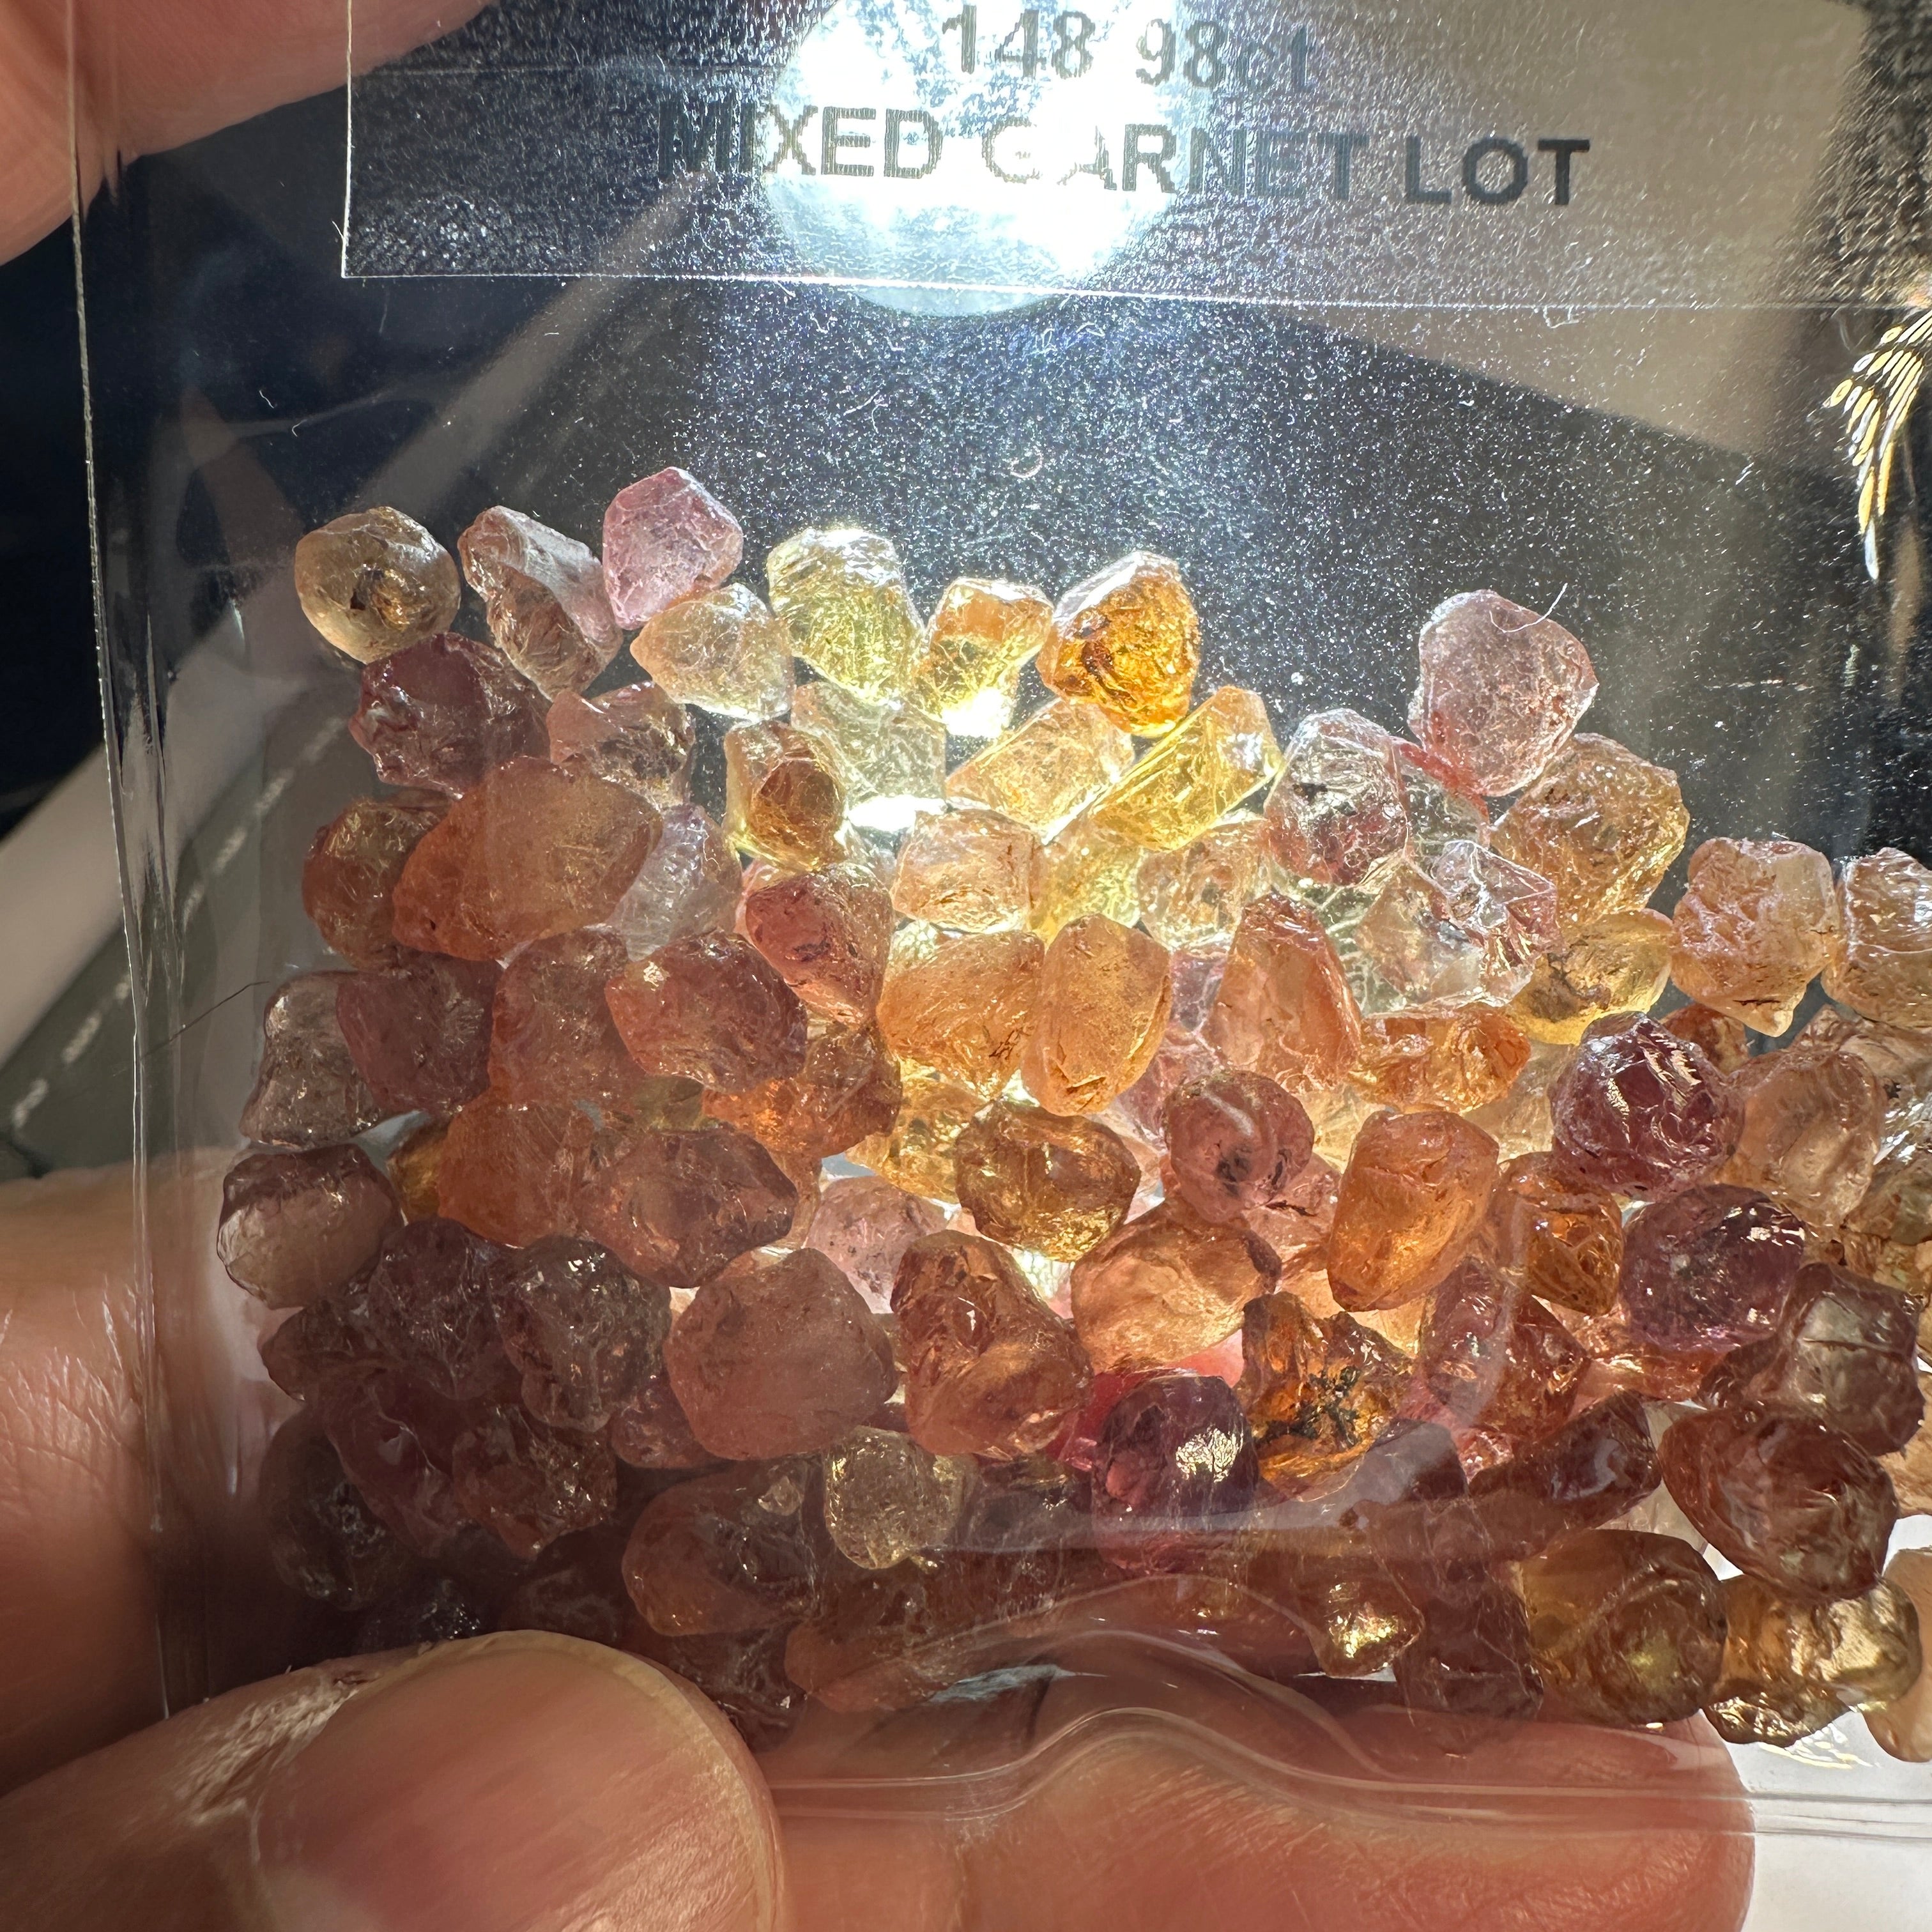 148.98ct Mixed Garnet Lot, Tanzania, Untreated Unheated, slightly included to included